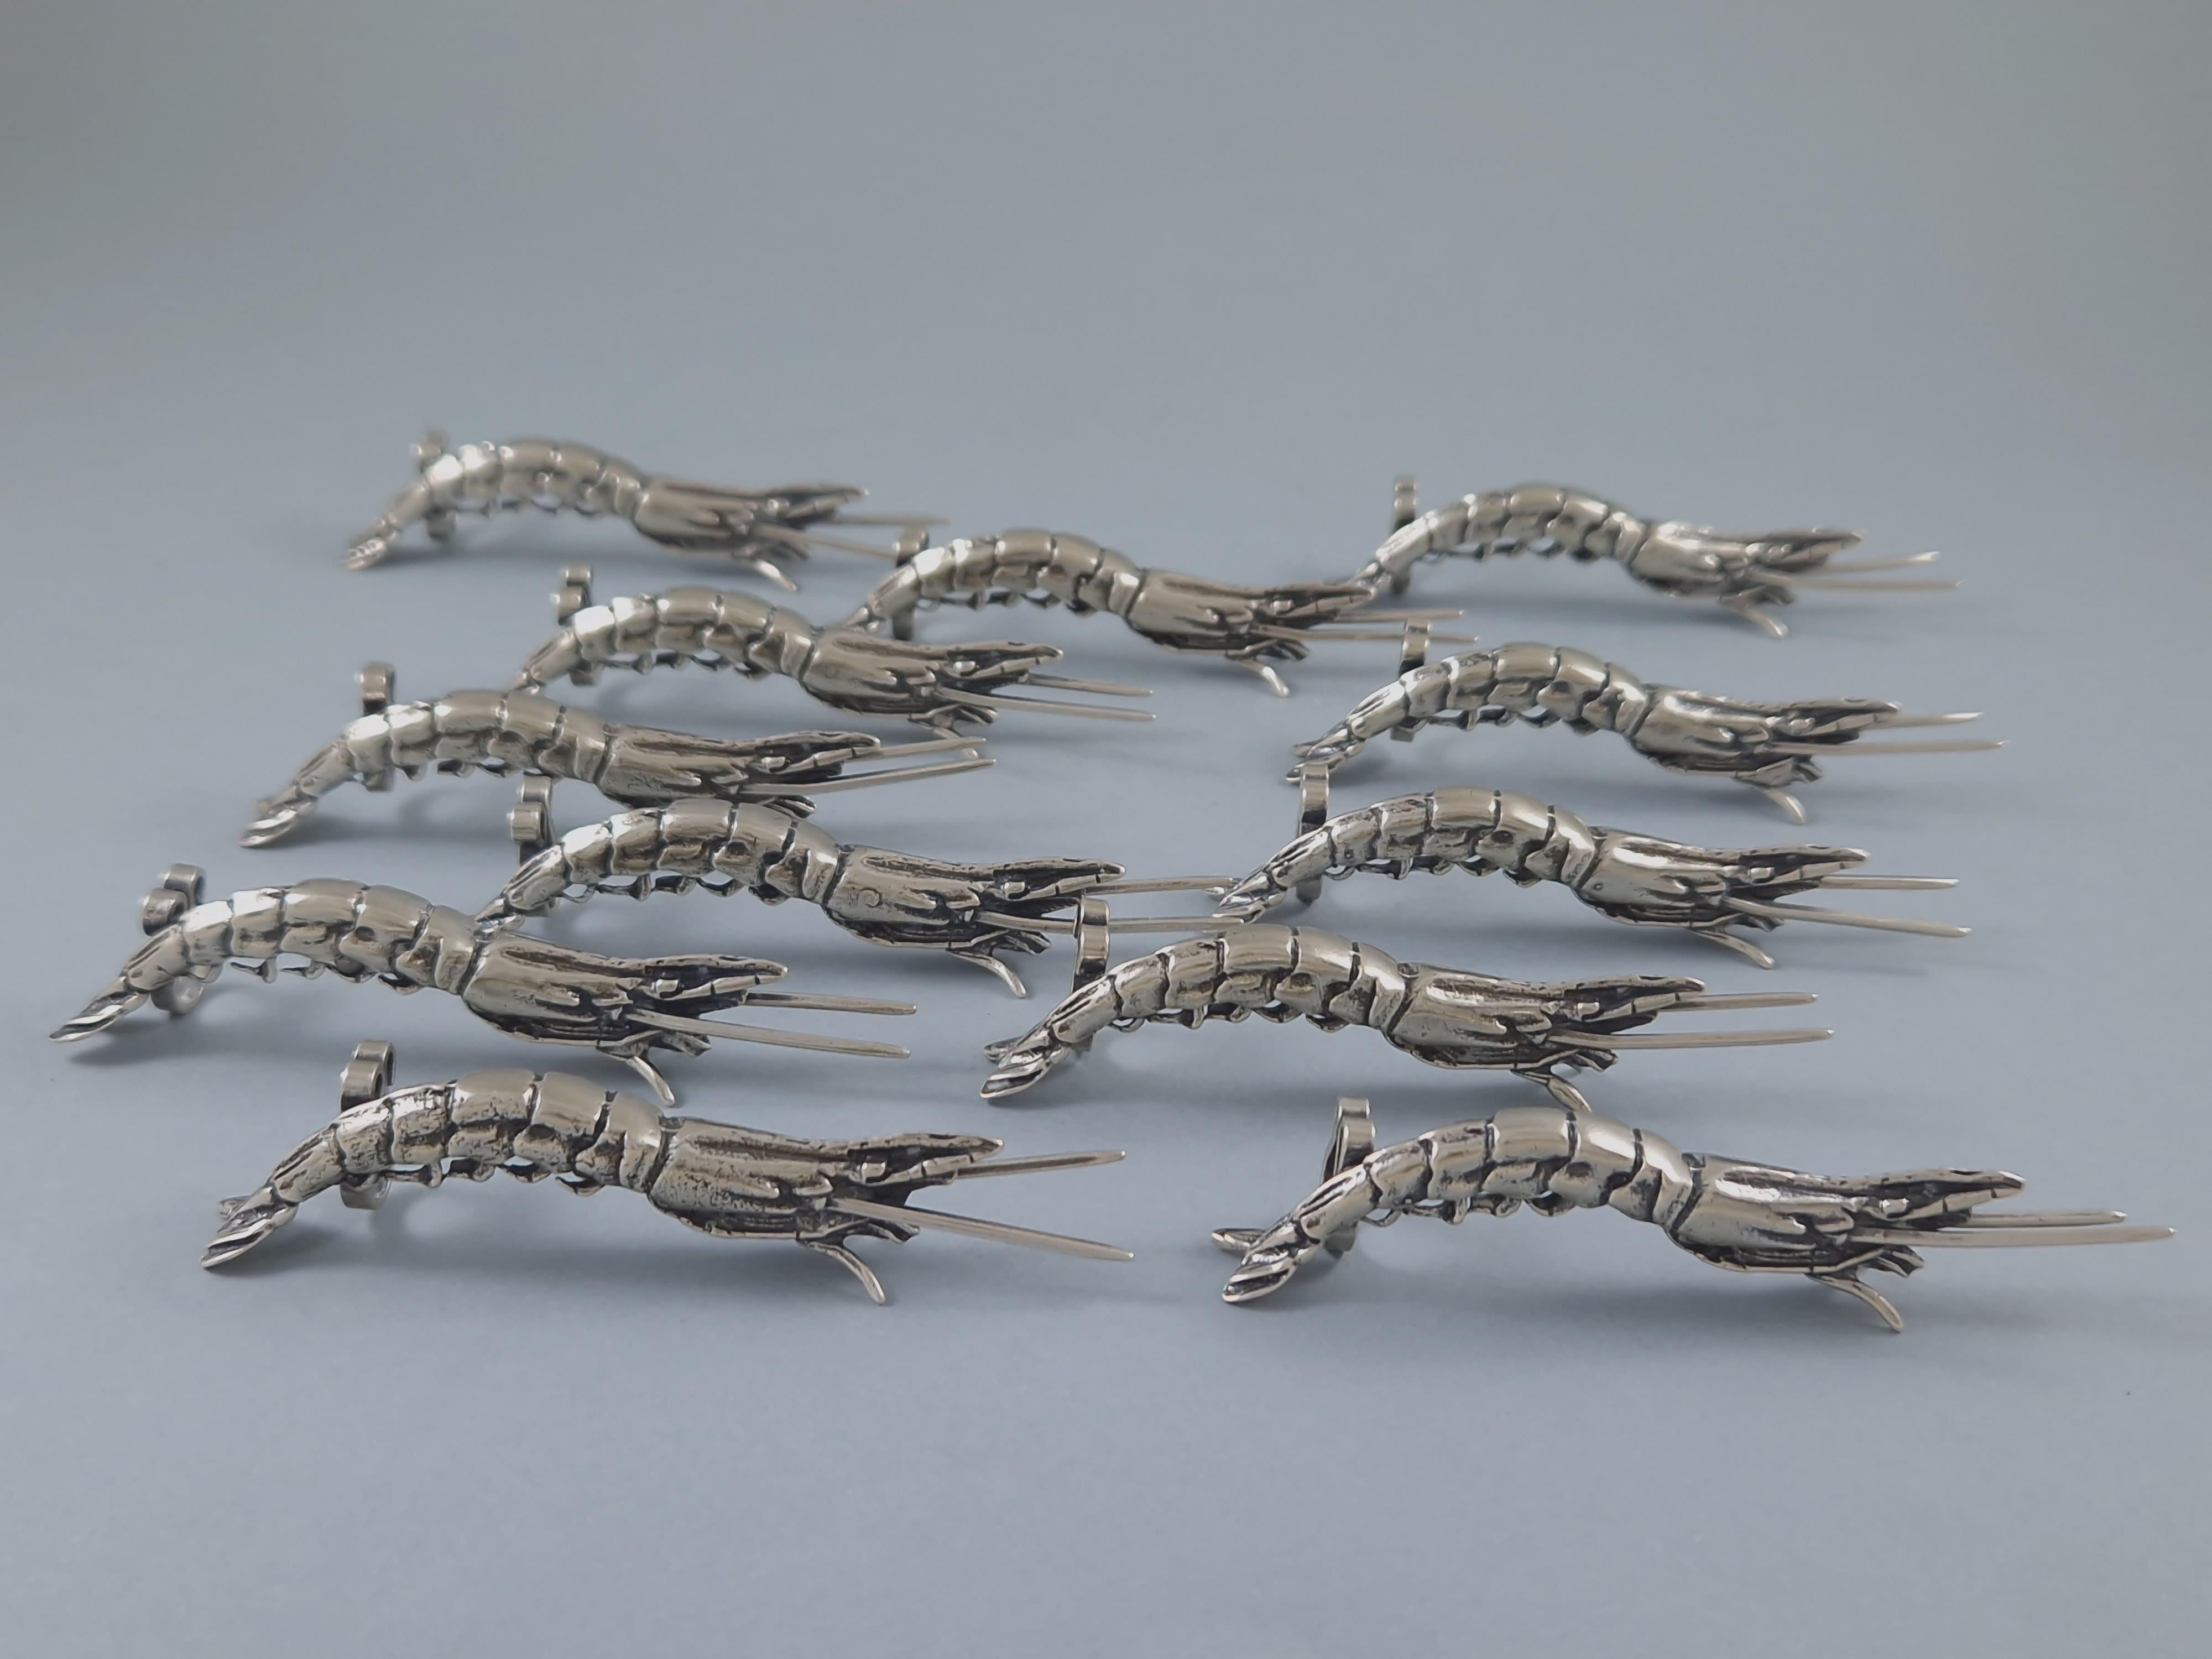 Set of 12 sterling silver place card holders in the shape of crustaceans
800 silver hallmark 
Length: 8.3 cm - 3.26 inches
Height: 1.8 cm - 0.7 inches
Weight: 270 grams
In perfect condition